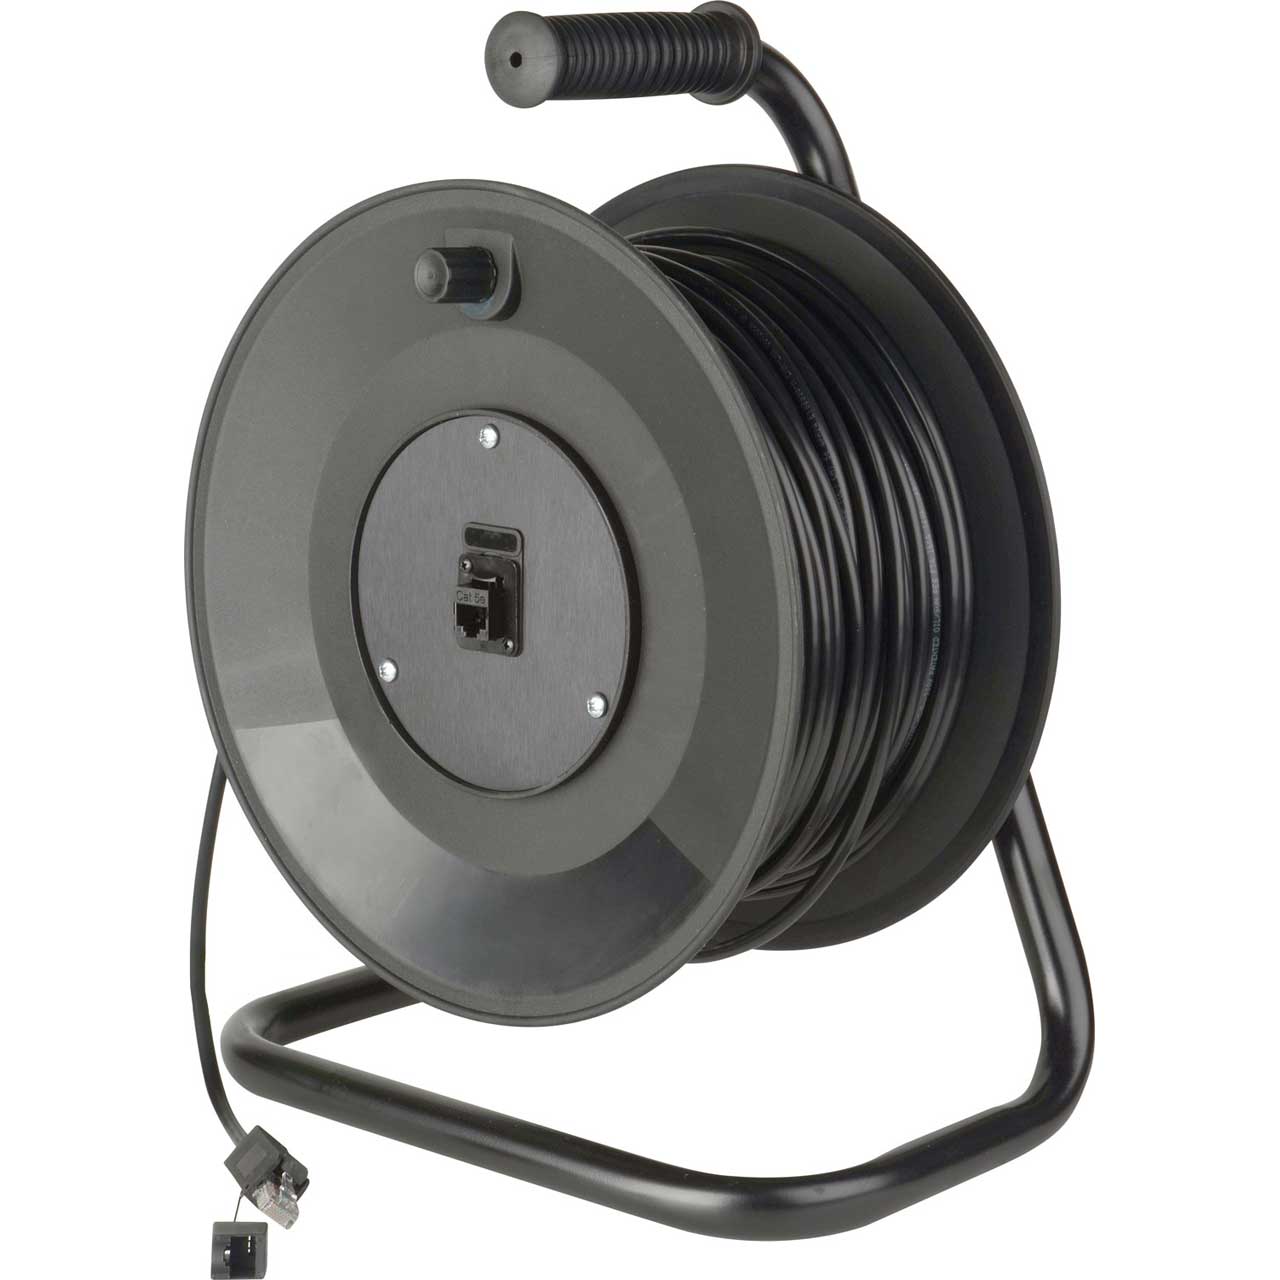 Mkr-tc-300 Connect-N-Go DataTuff Belden 7923a Cat5e with Pro Shell Cable Reel 300 ft.